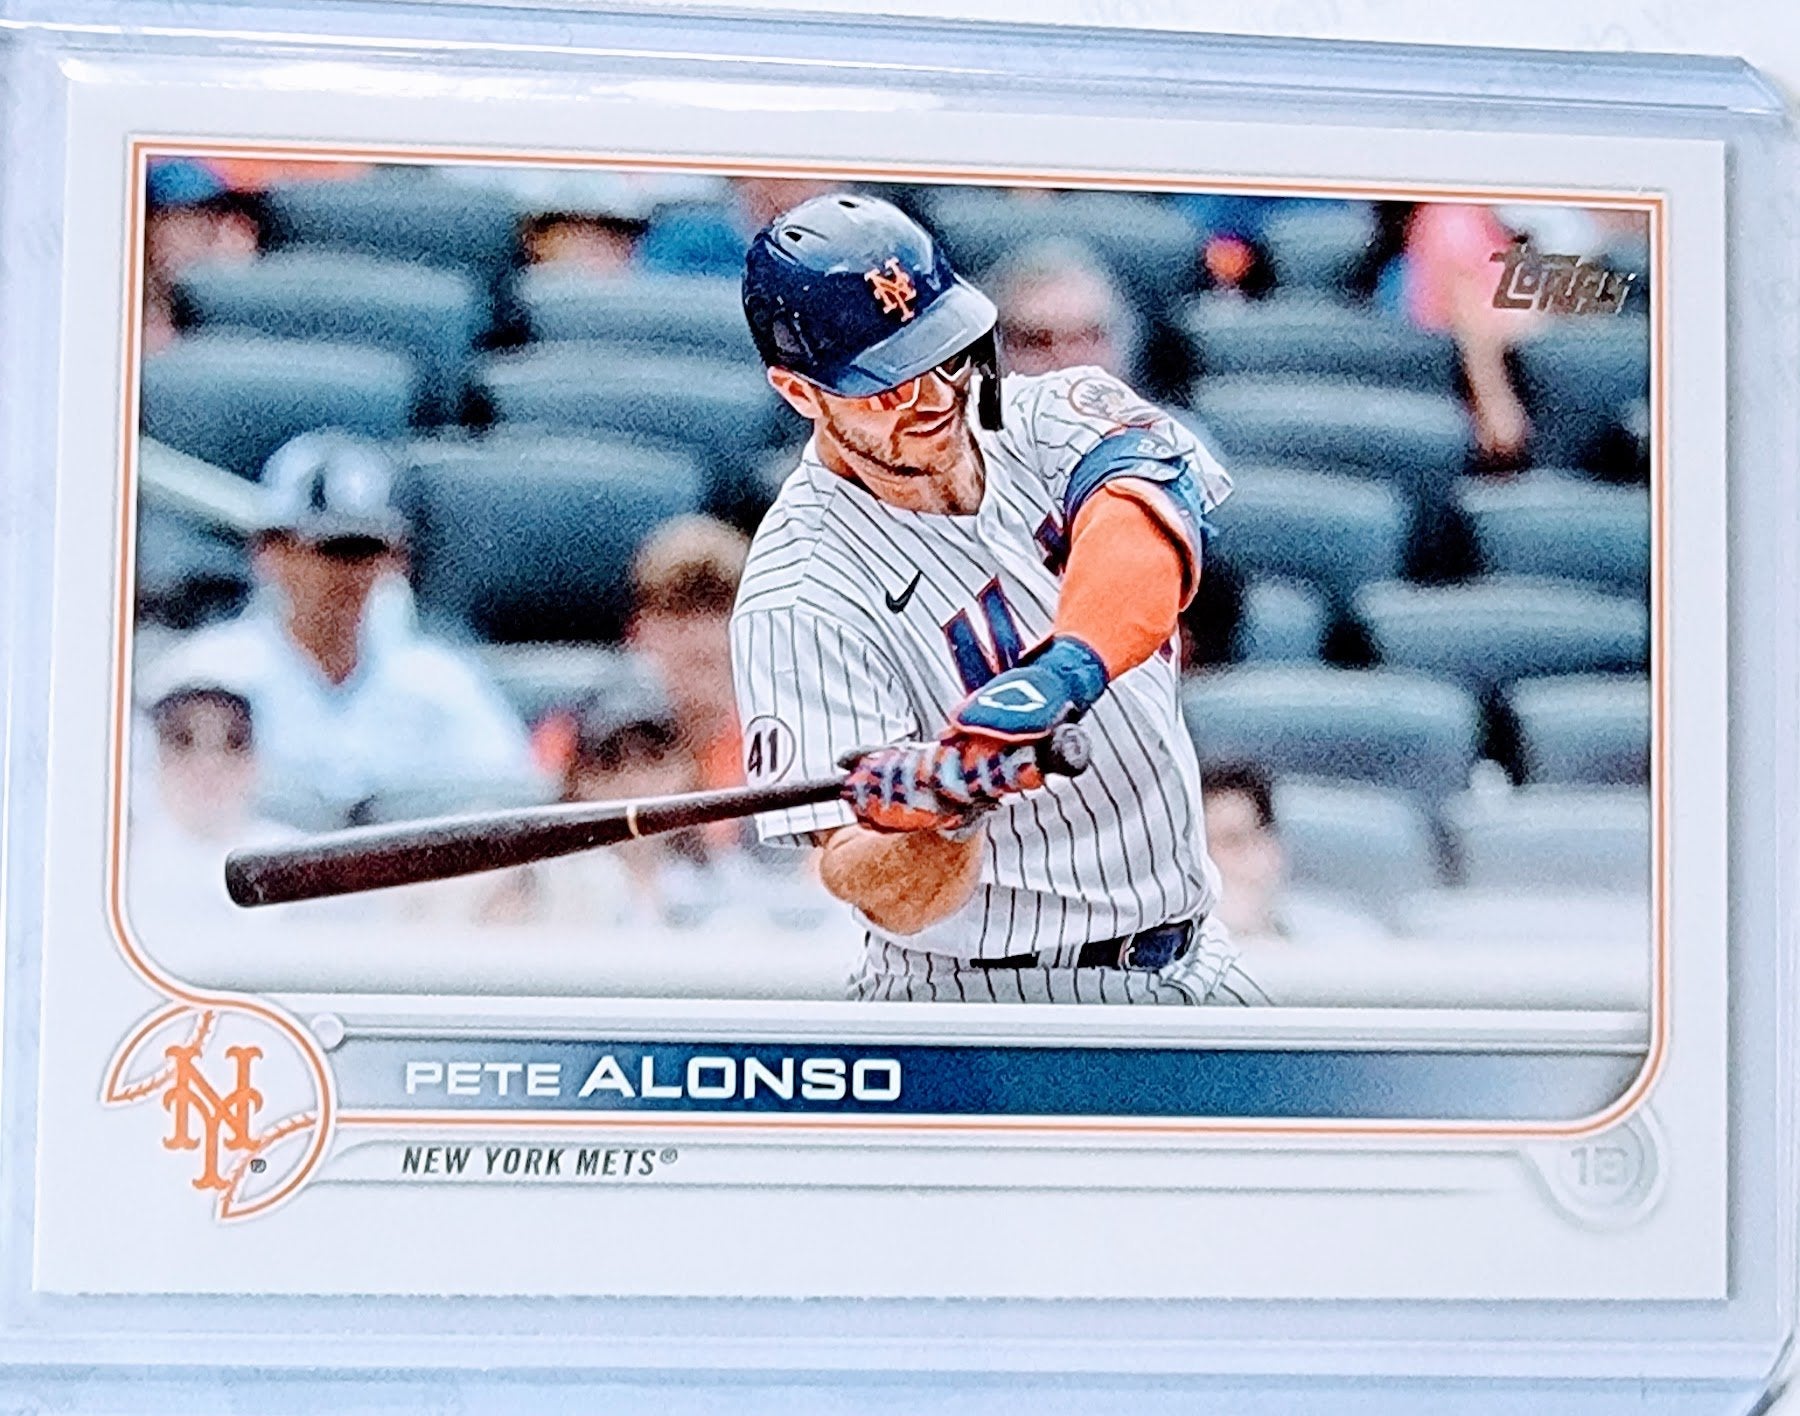 2022 Topps Pete Alonso Baseball Trading Card GRB1 simple Xclusive Collectibles   